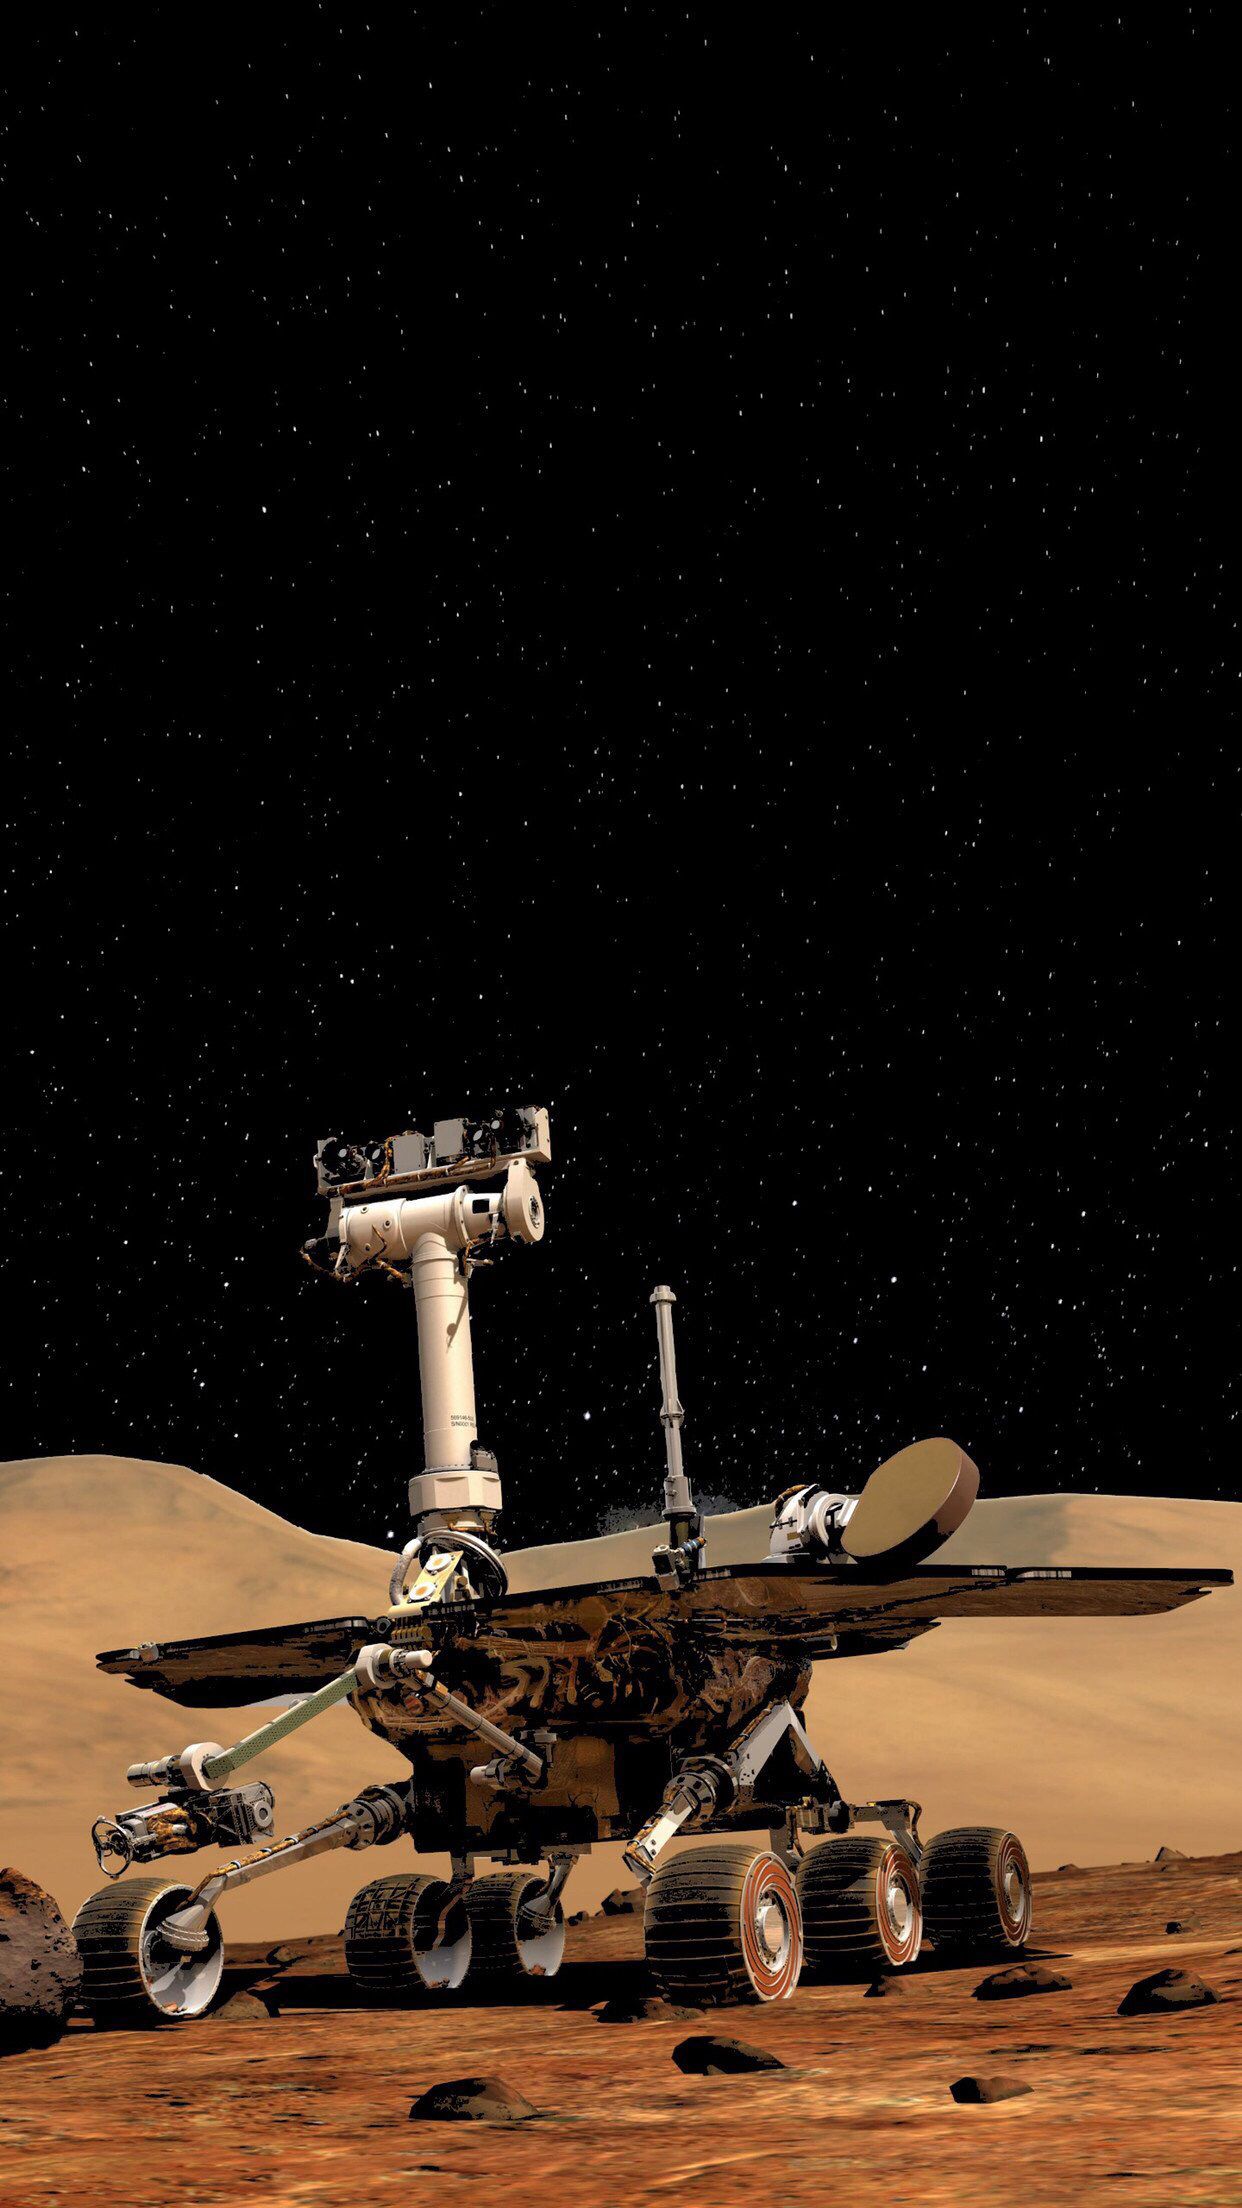 I made an Oledified Opportunity Mars Rover phone wallpaper, hope you like it!